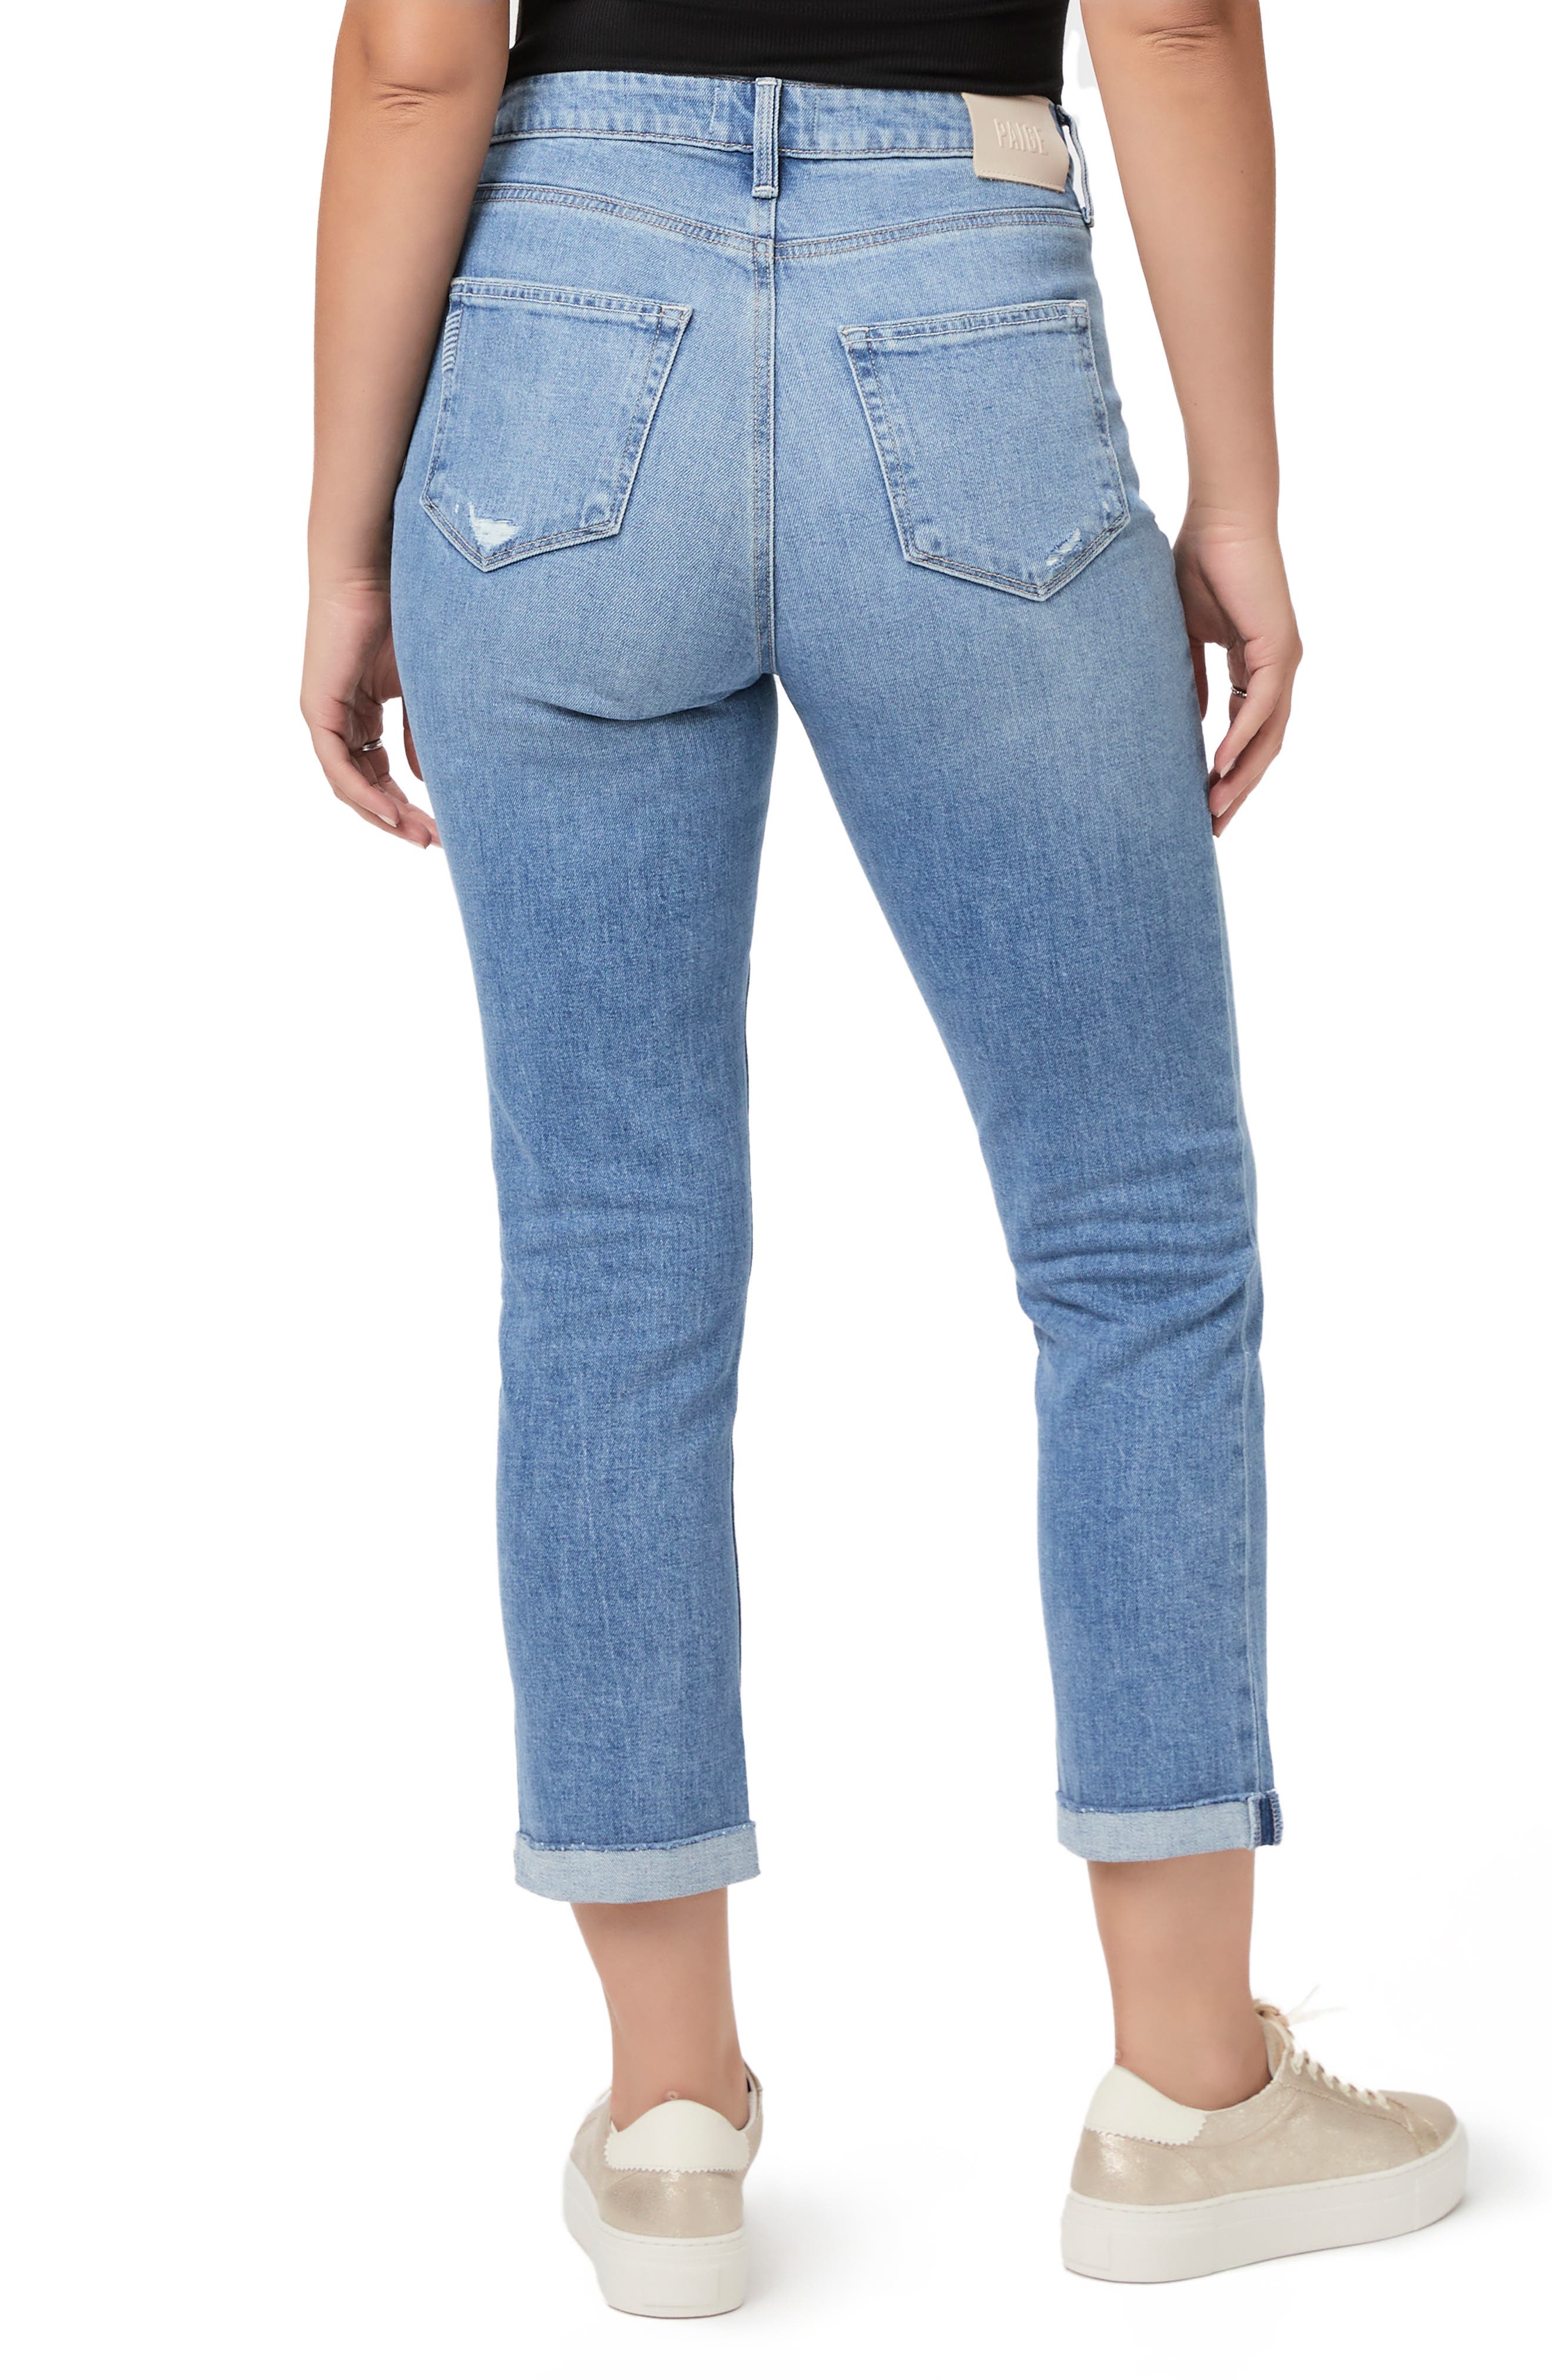 Paige Brigitte Jeans for Women - Up to 80% off